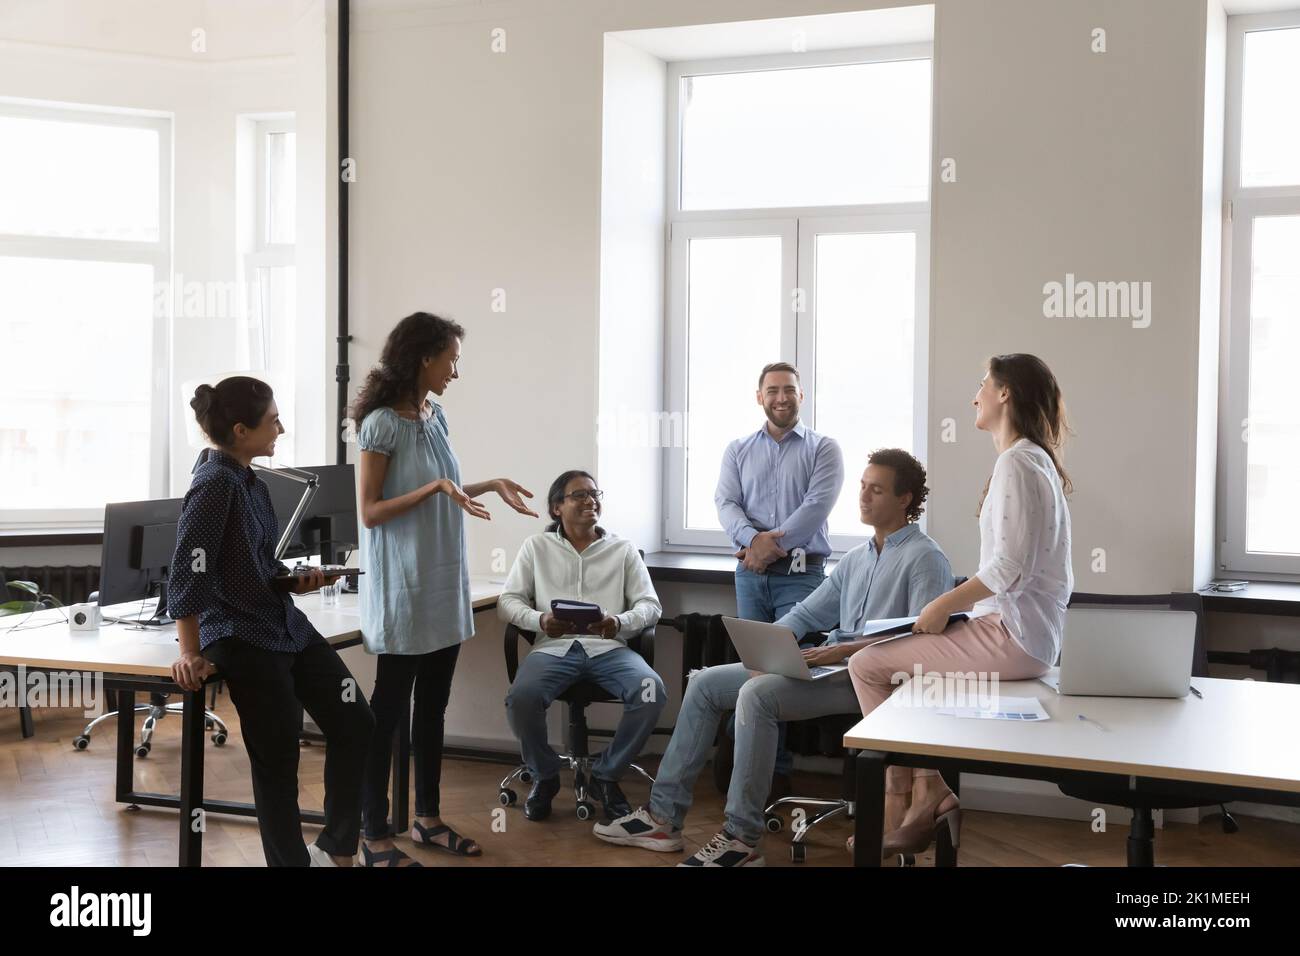 Young multiethnic business team brainstorming in project, sharing creative ideas Stock Photo